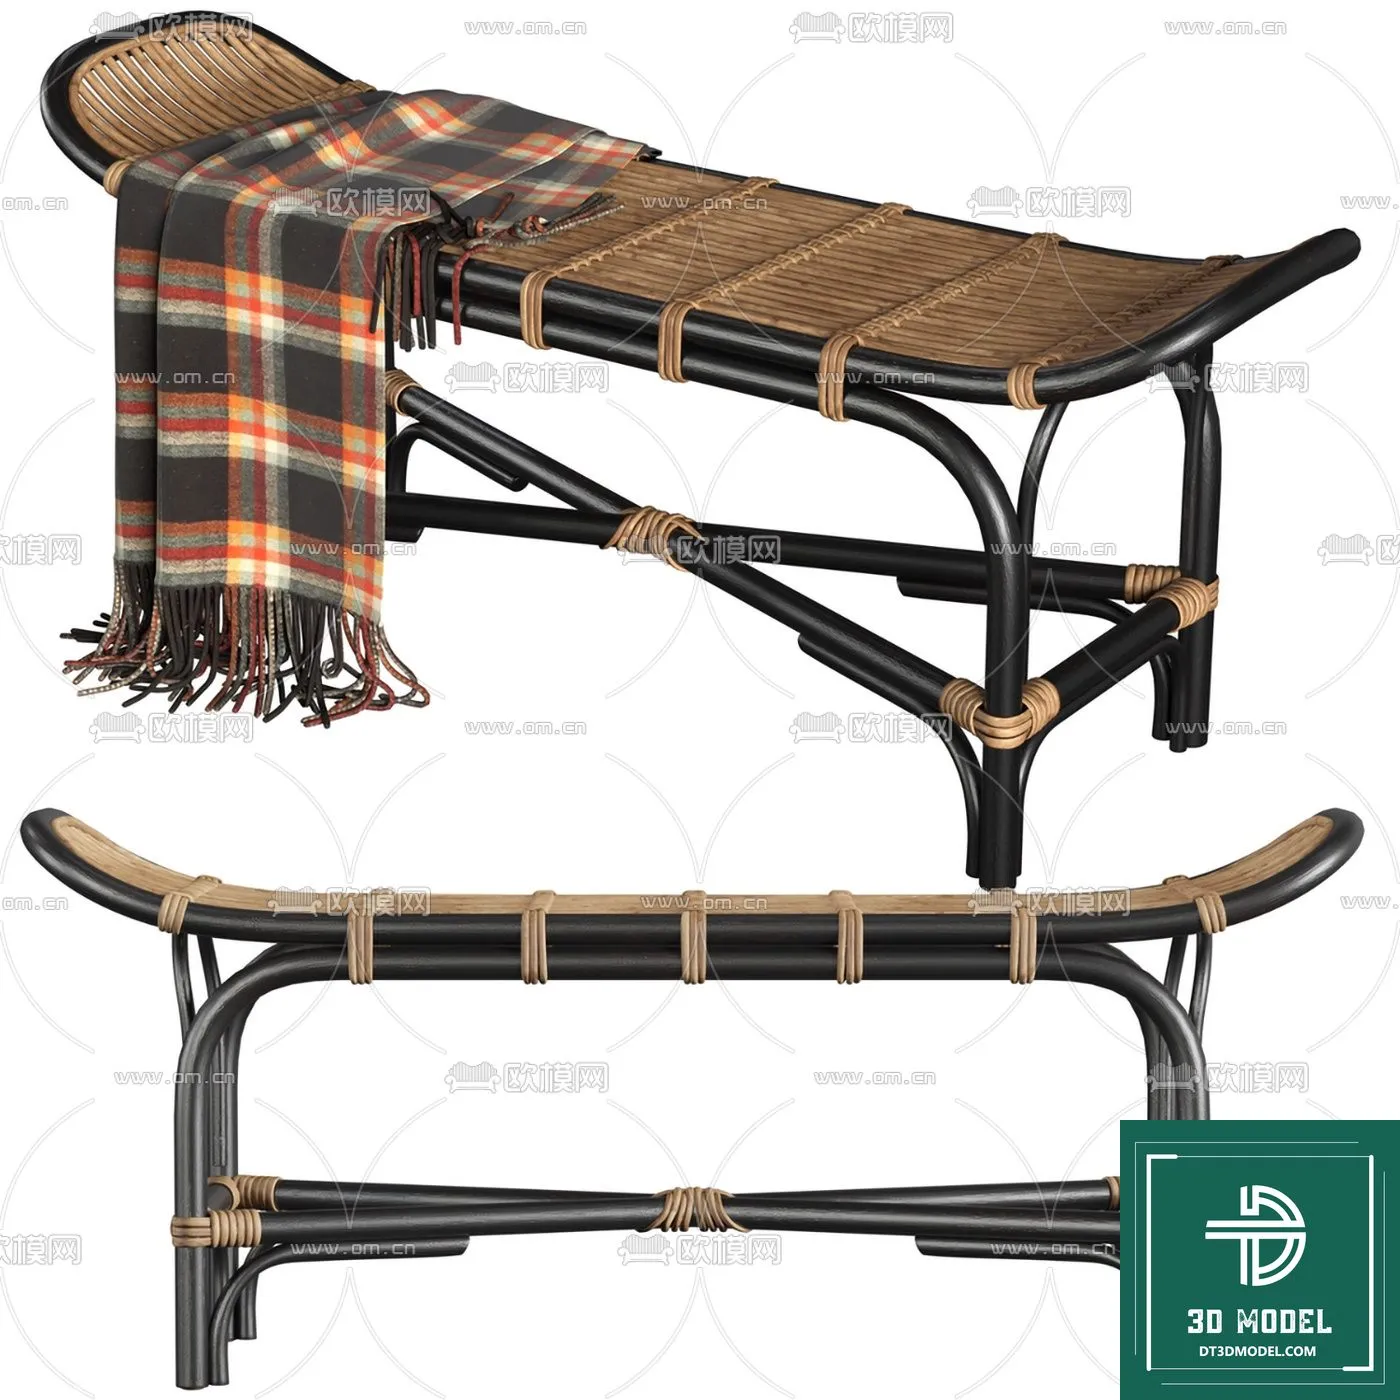 INDOCHINE STYLE – 3D MODELS – 158